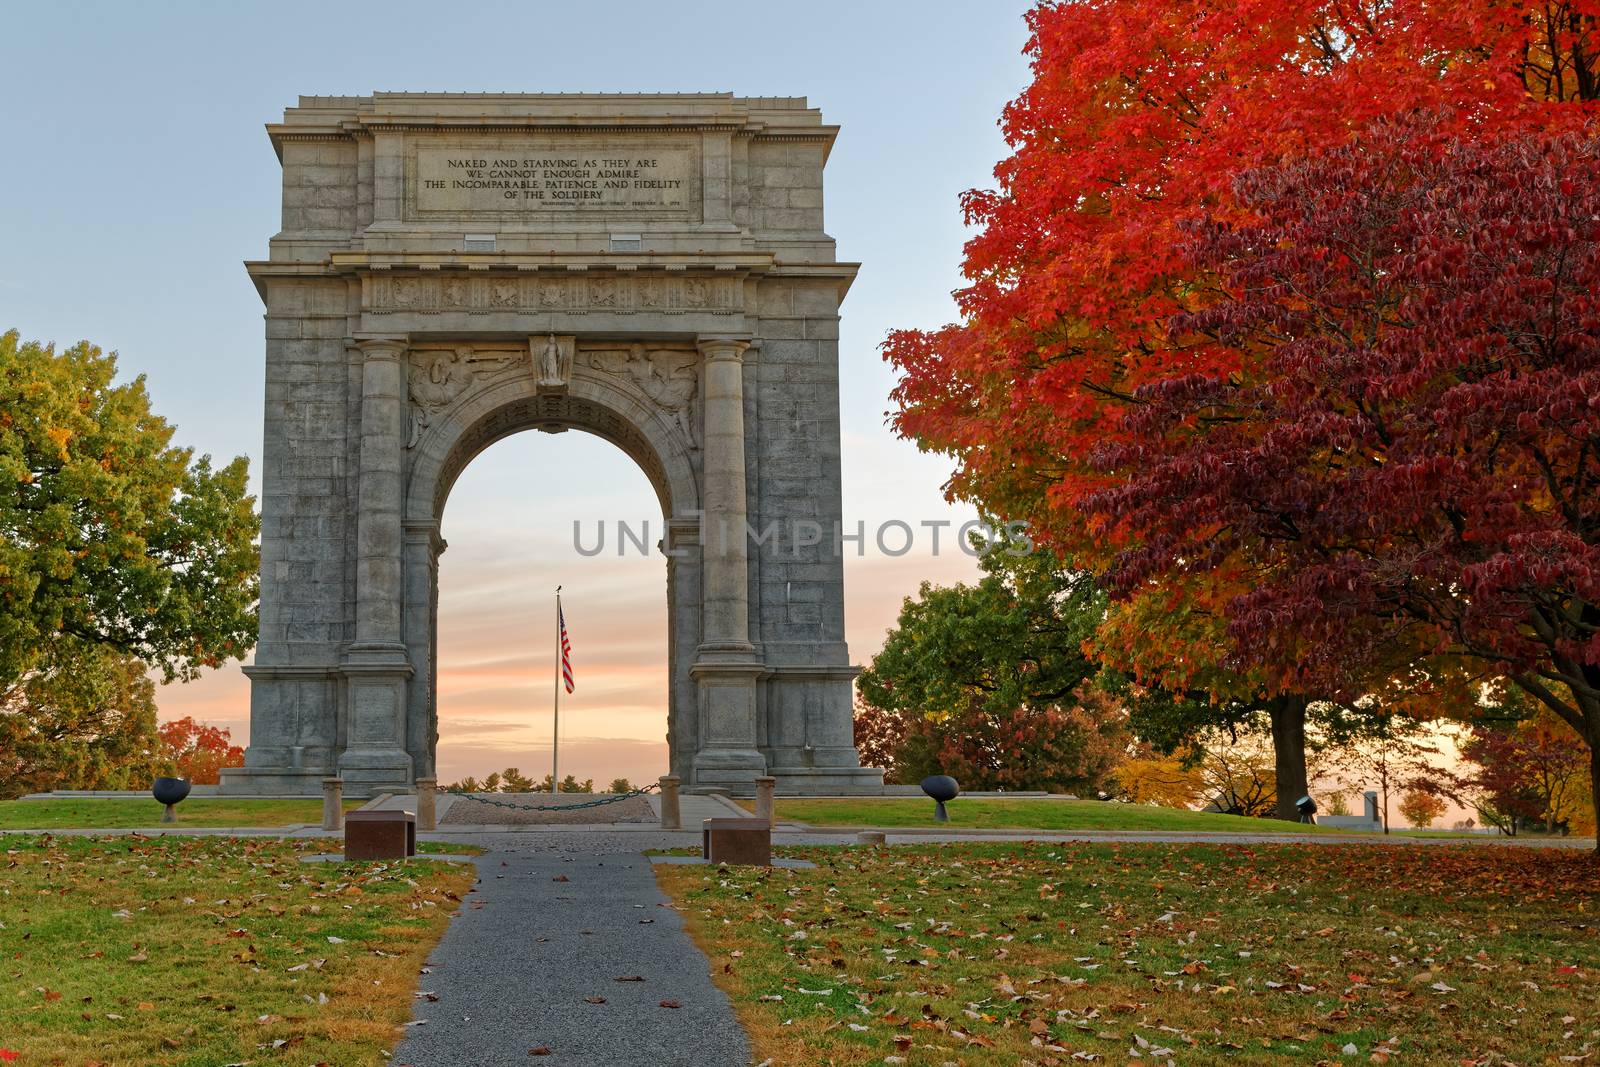 A beautiful autumn sunrise at Valley Forge. The National Memorial Arch is a  monument dedicated to George Washington and the United States Continental Army. This monument is located at Valley Forge National Historical Park in Pennsylvania, USA.